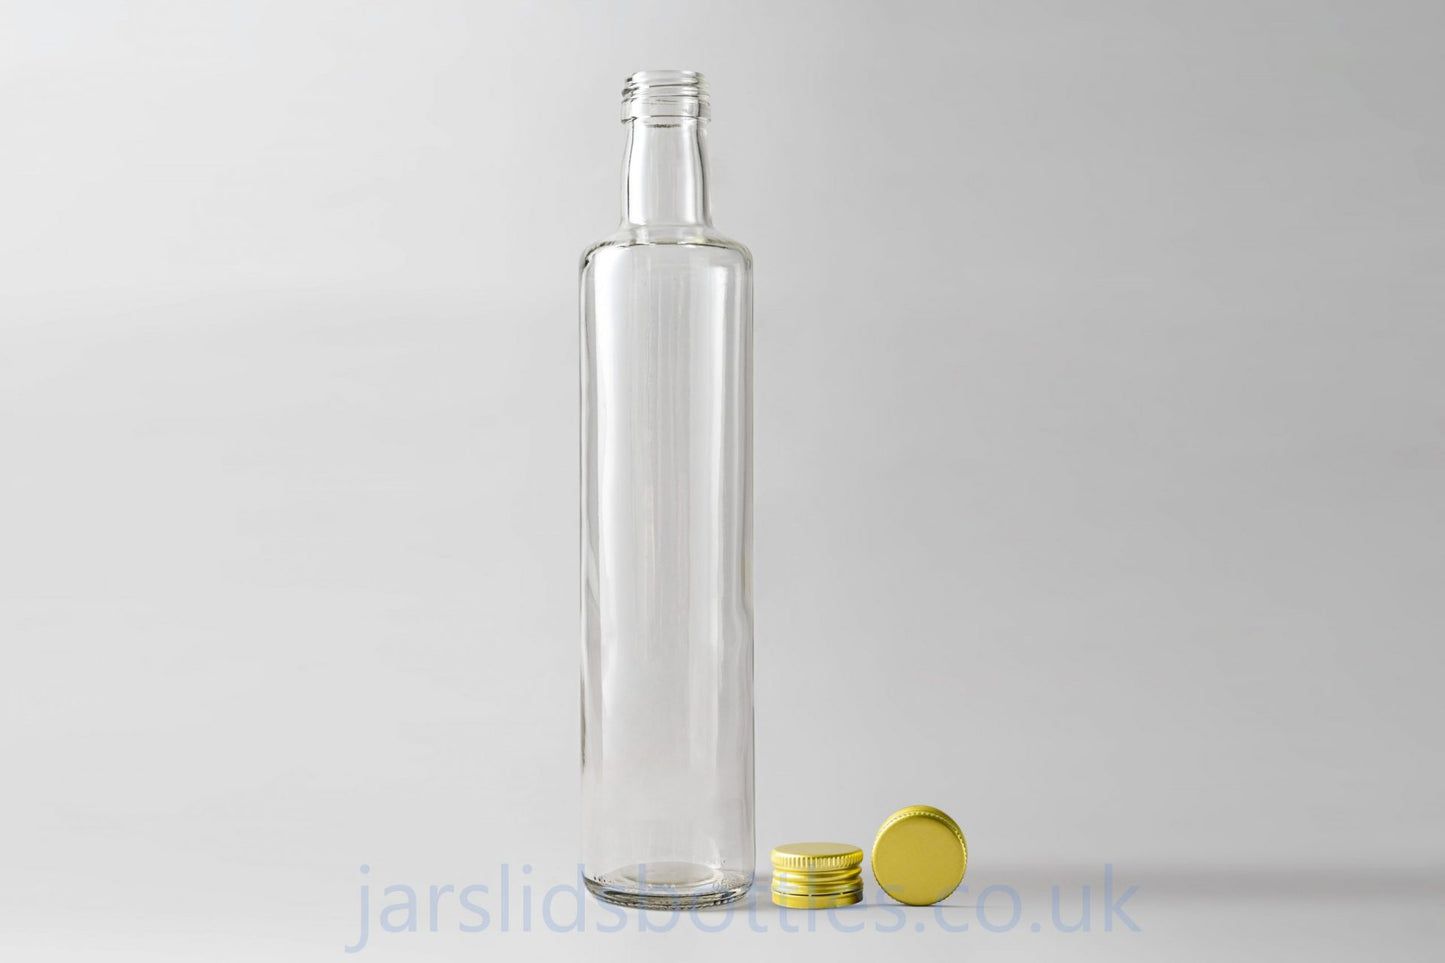 Glass bottle 500 ml Dorica. Coming with stoppers.